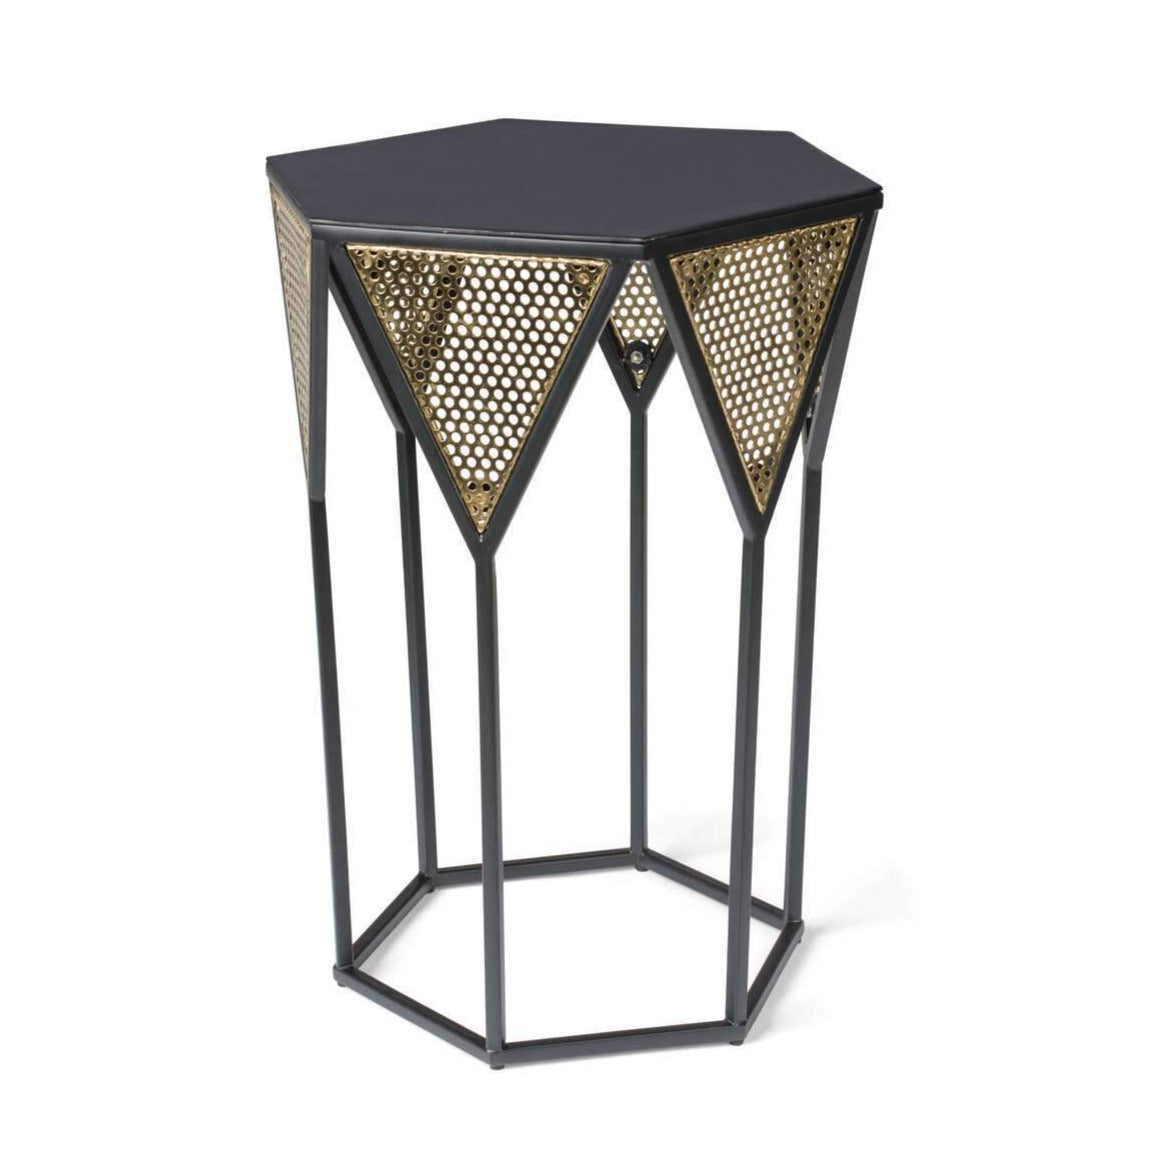 Thanks to the elegant hexagonal shape and shiny enamel, the latest Bold Monkey table gives every space a polished accent. From the kingdom of ancient Egypt to the flourishing of discos in the 70s, black and gold have been determinants of splendor since the dawn of history. Follow this tradition and bring home a piece of glamor today with the side table Hoked on You.